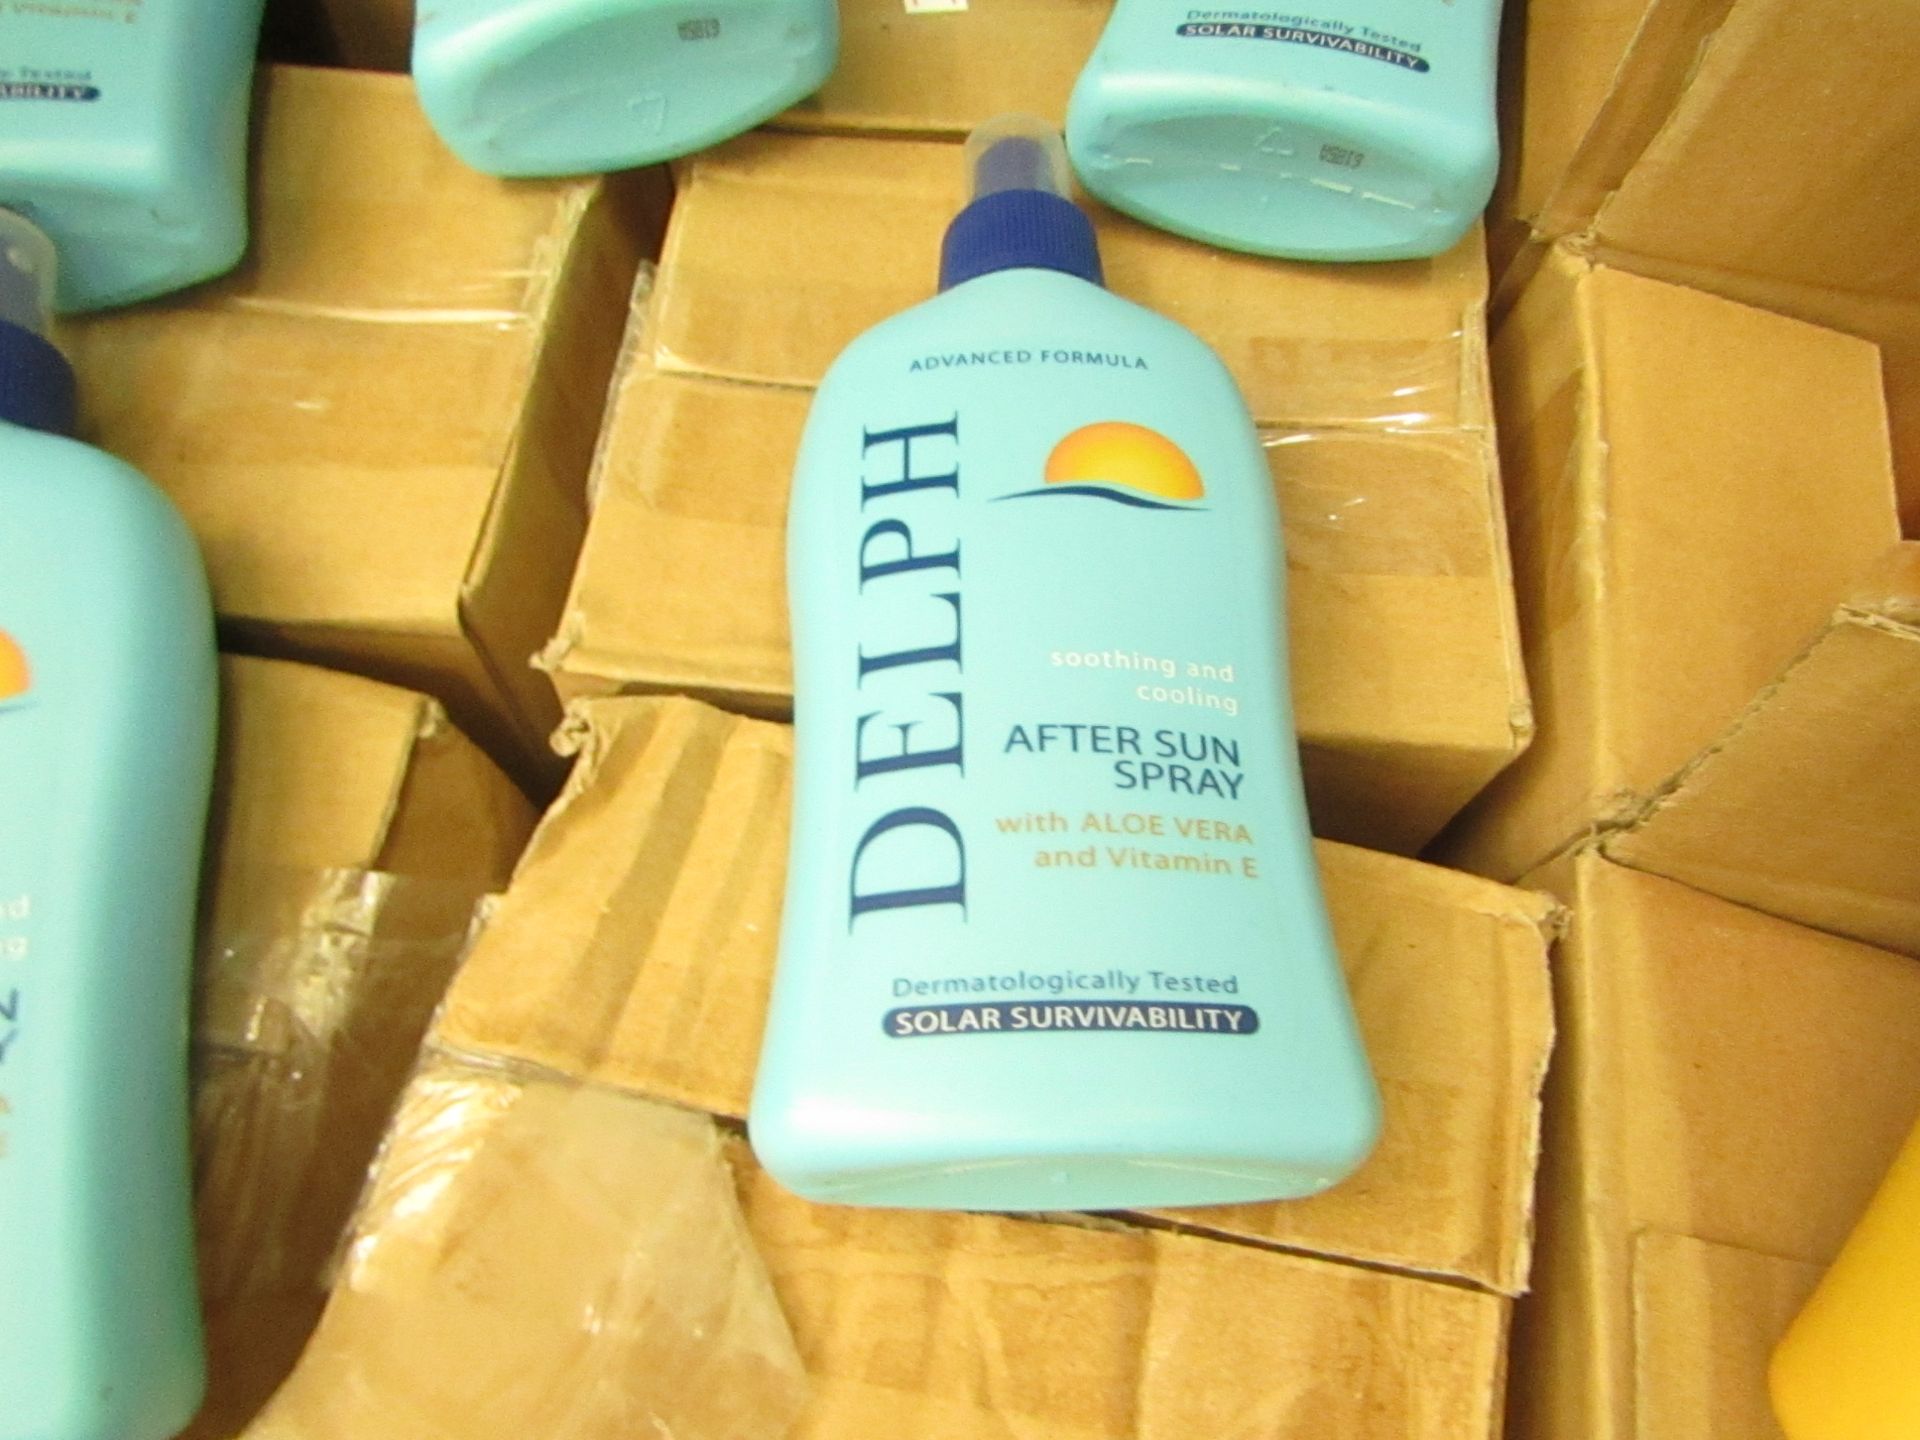 6 x 200ml Delph Soothing & Cooling After Sun Sprays. New & Boxed